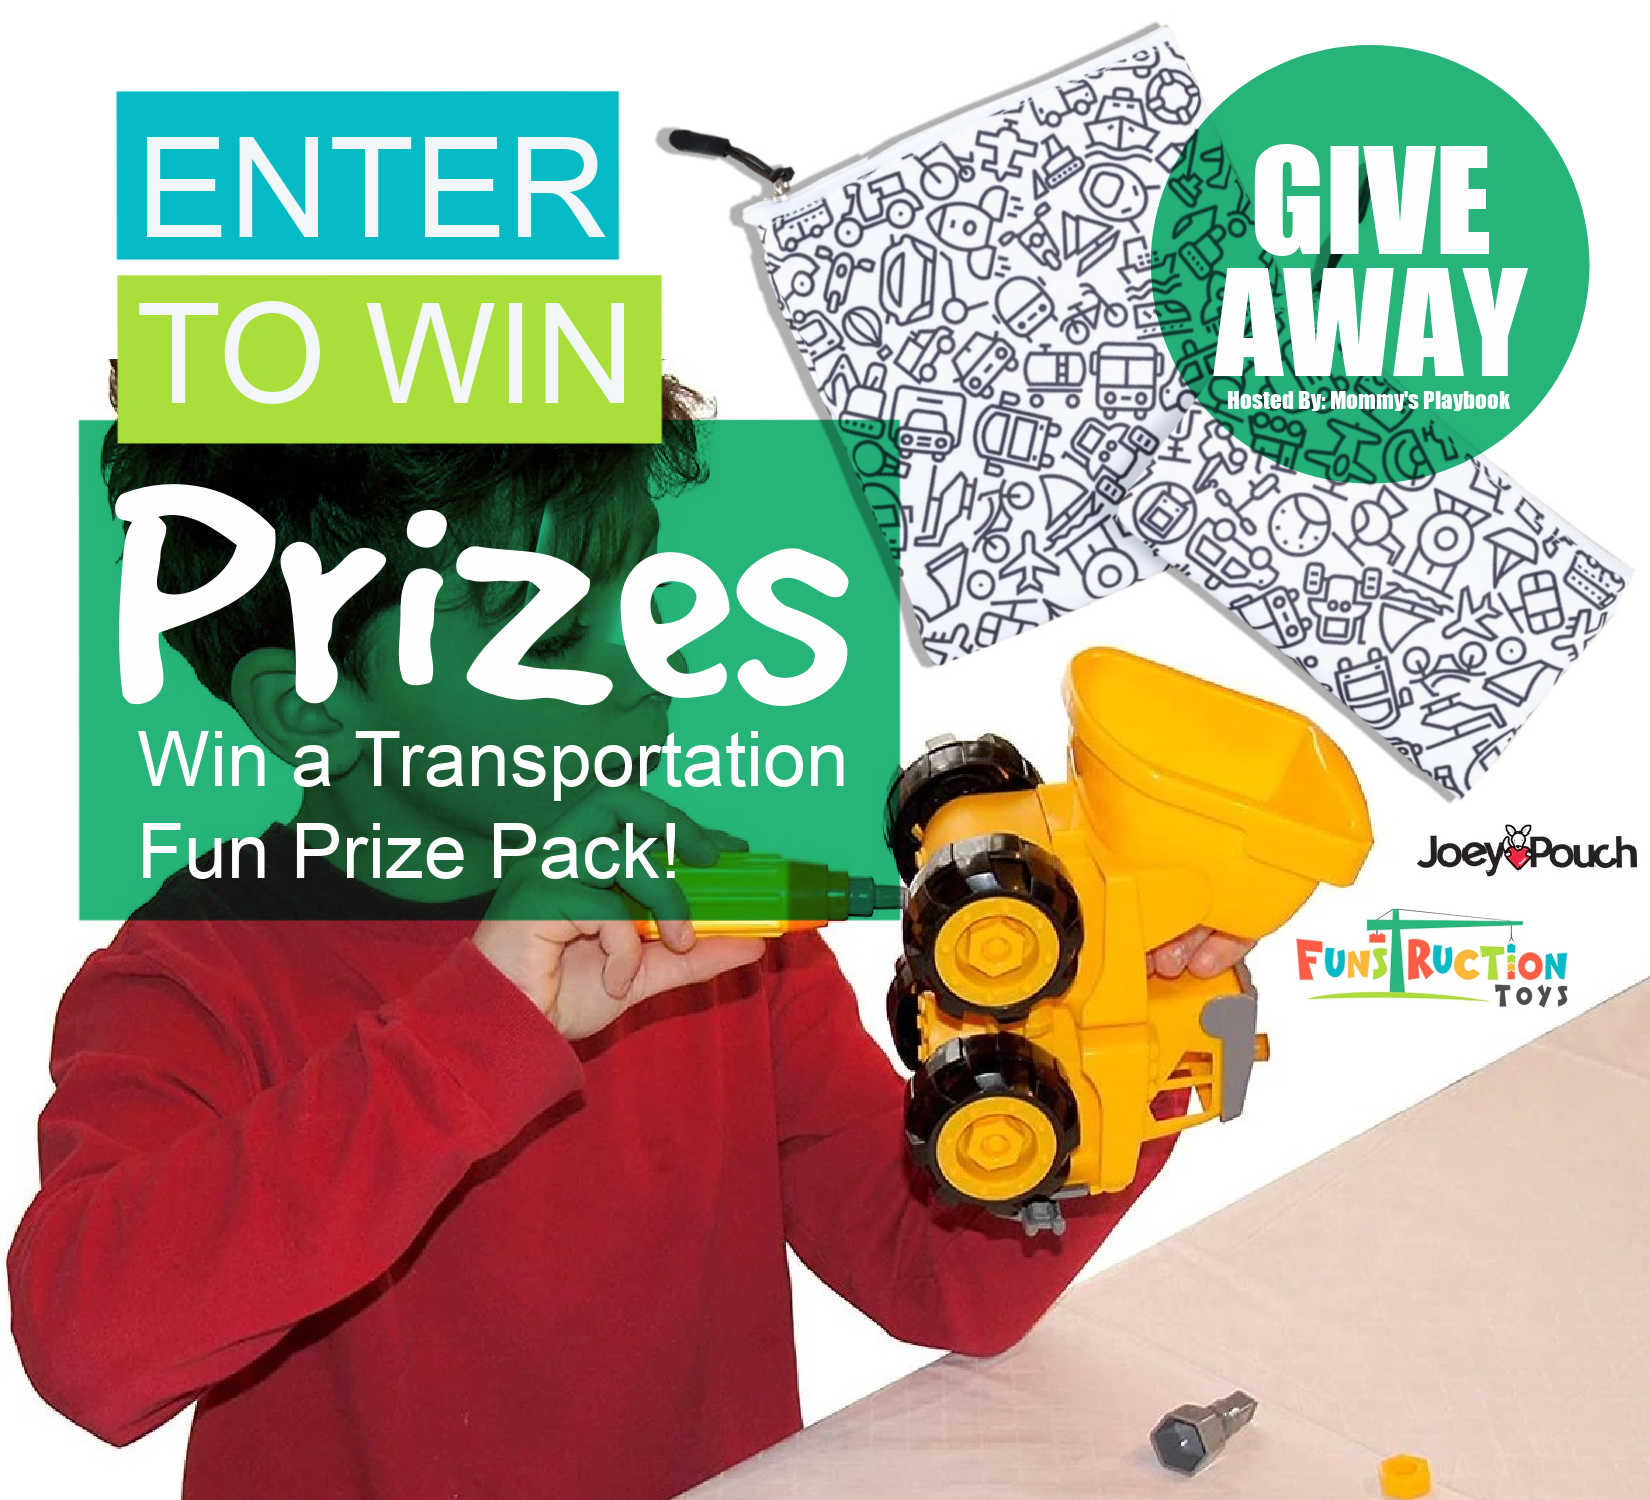 #Win A Fun Transportation Prize Package!